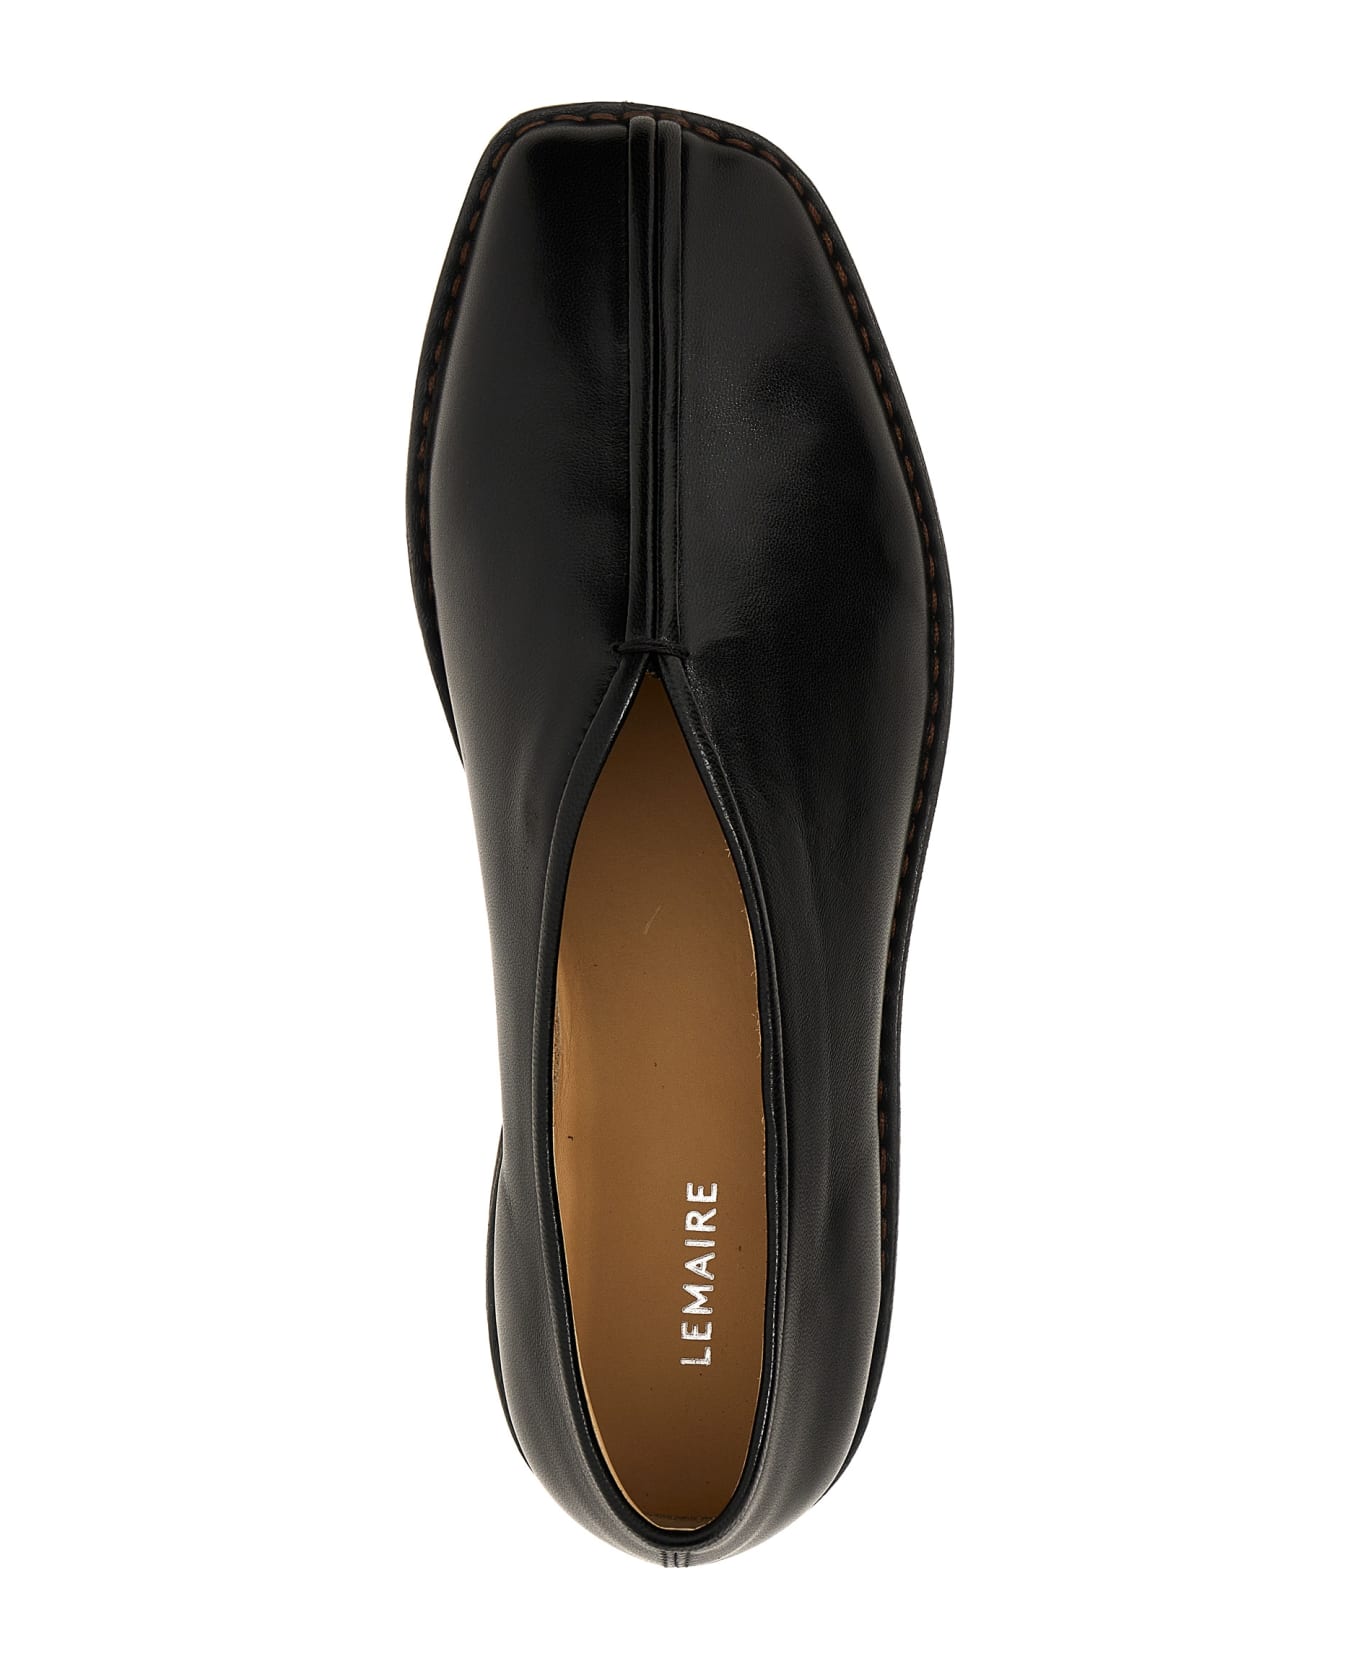 Lemaire Slip On 'flat Piped' - Black